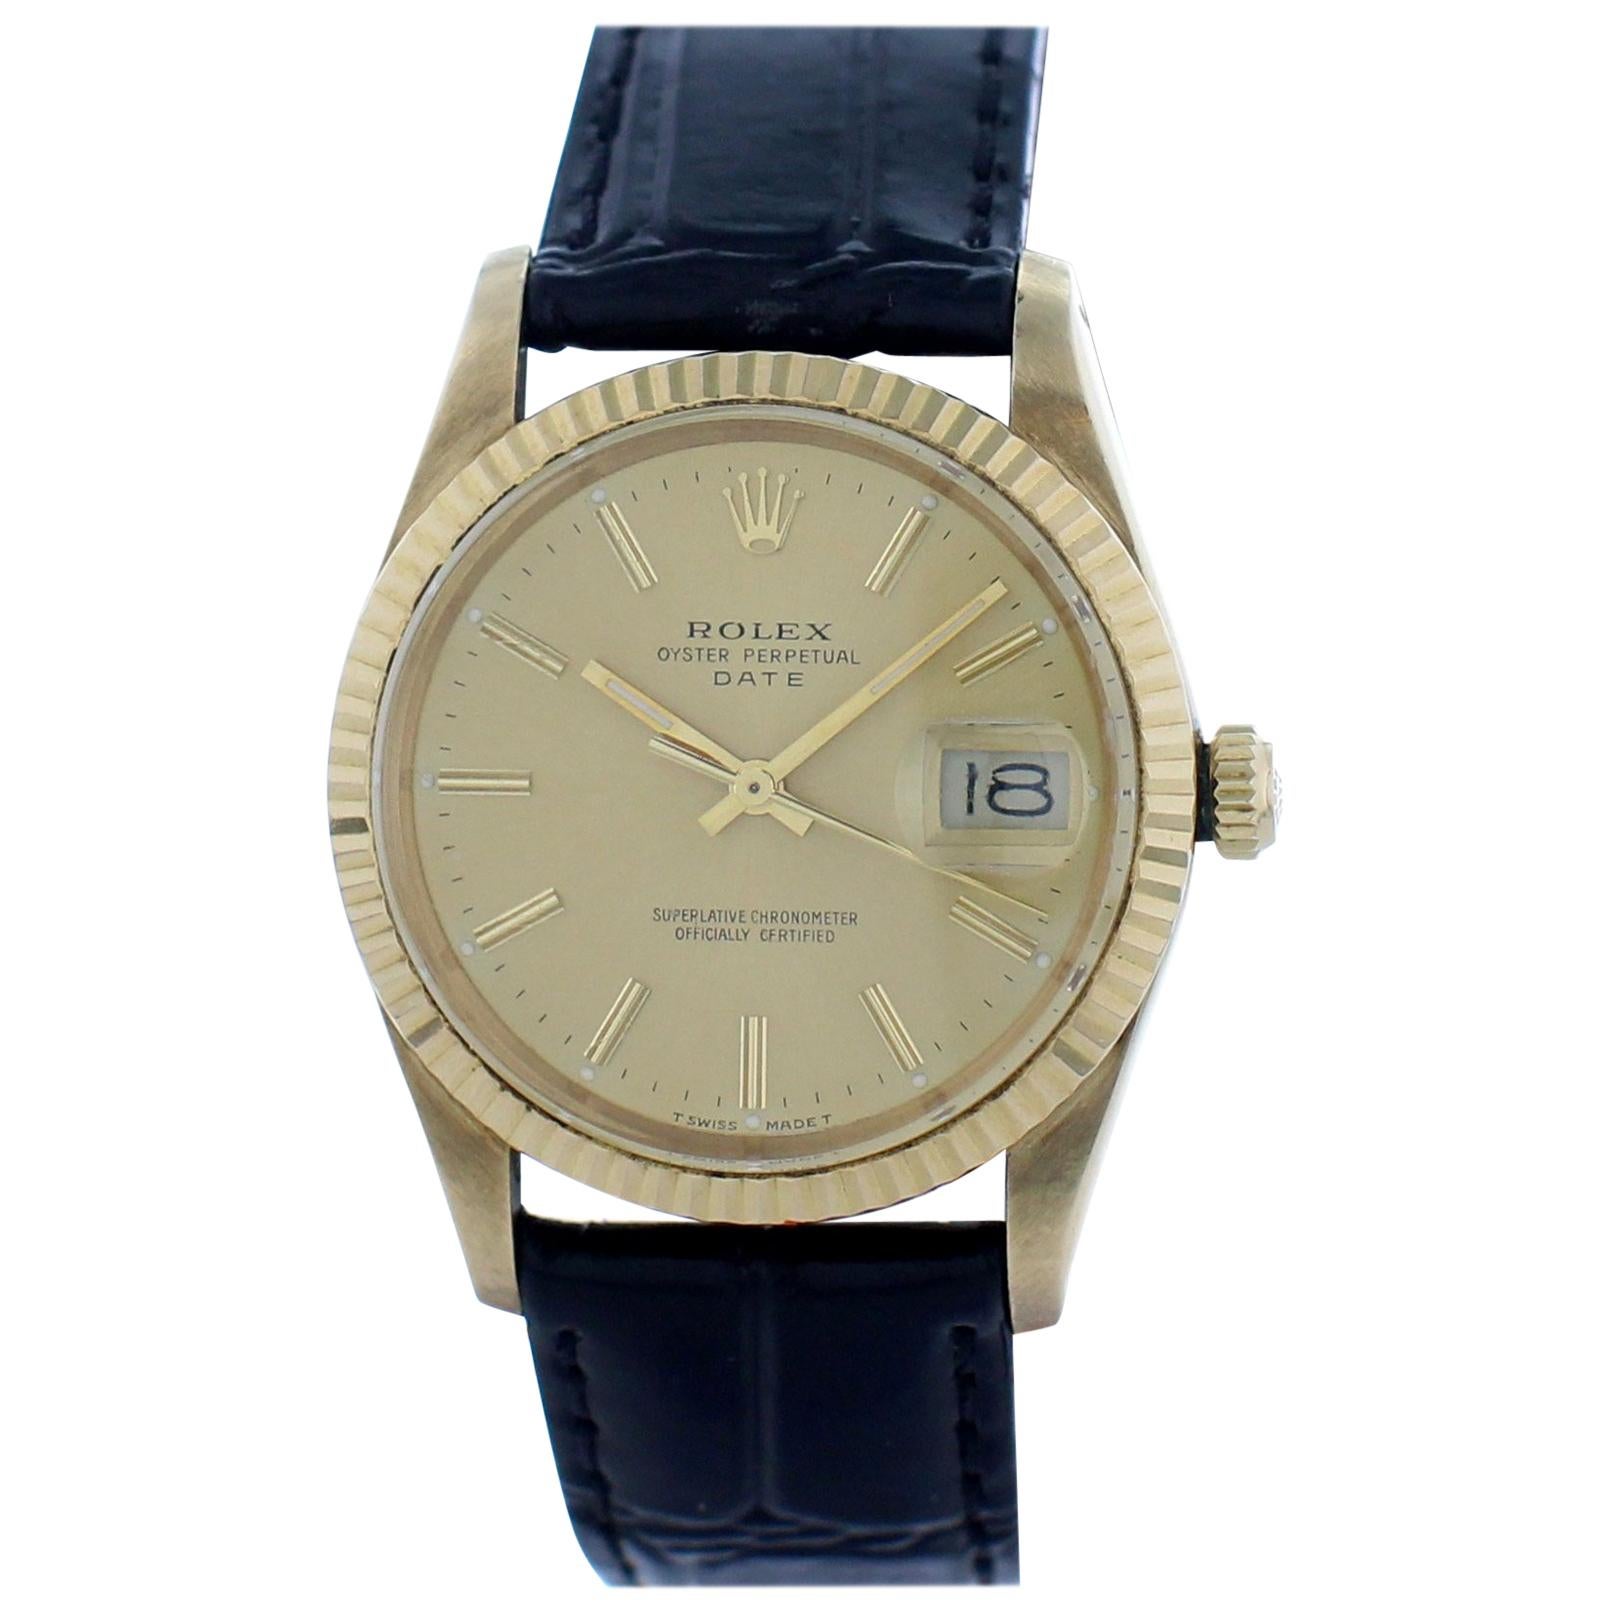 Rolex Oyster Perpetual Date 15038 18 Karat Yellow Gold Vintage Watch